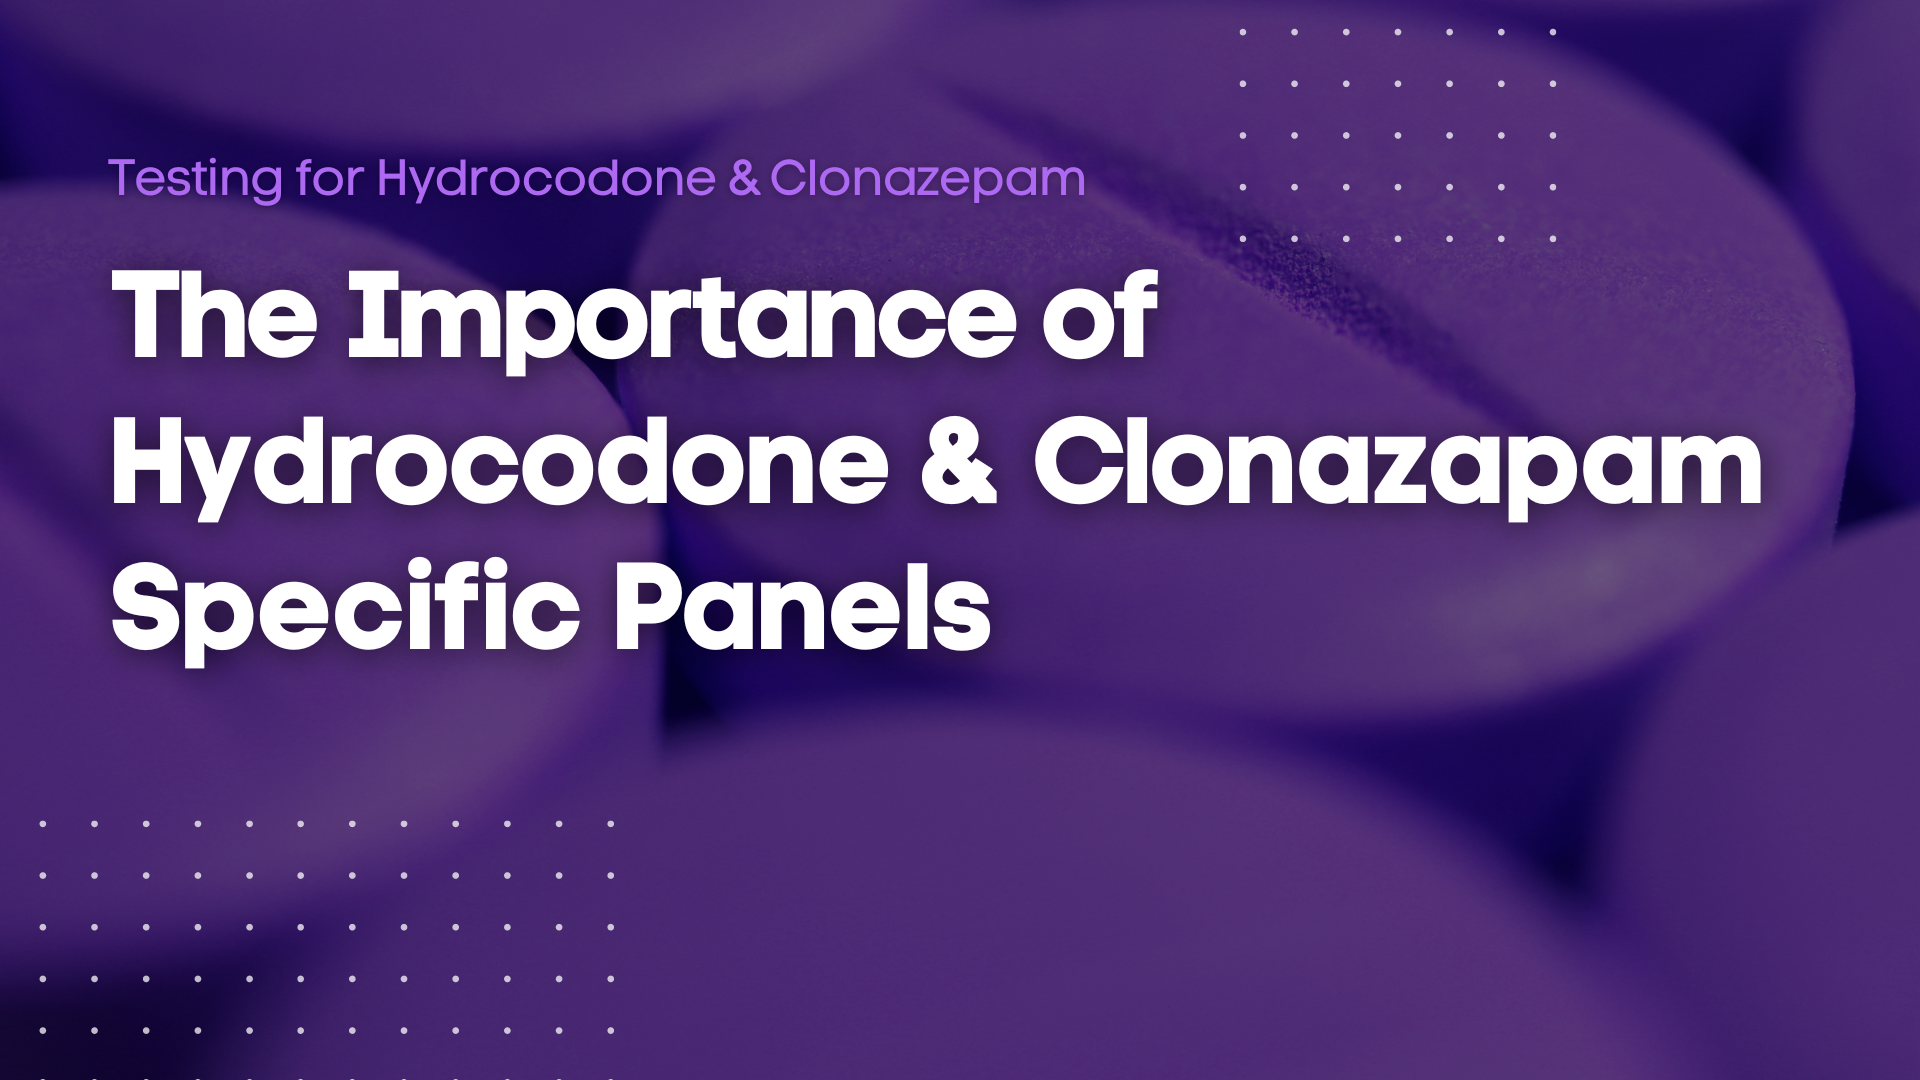 The Importance of Hydrocodone and Clonazepam Specific Panels